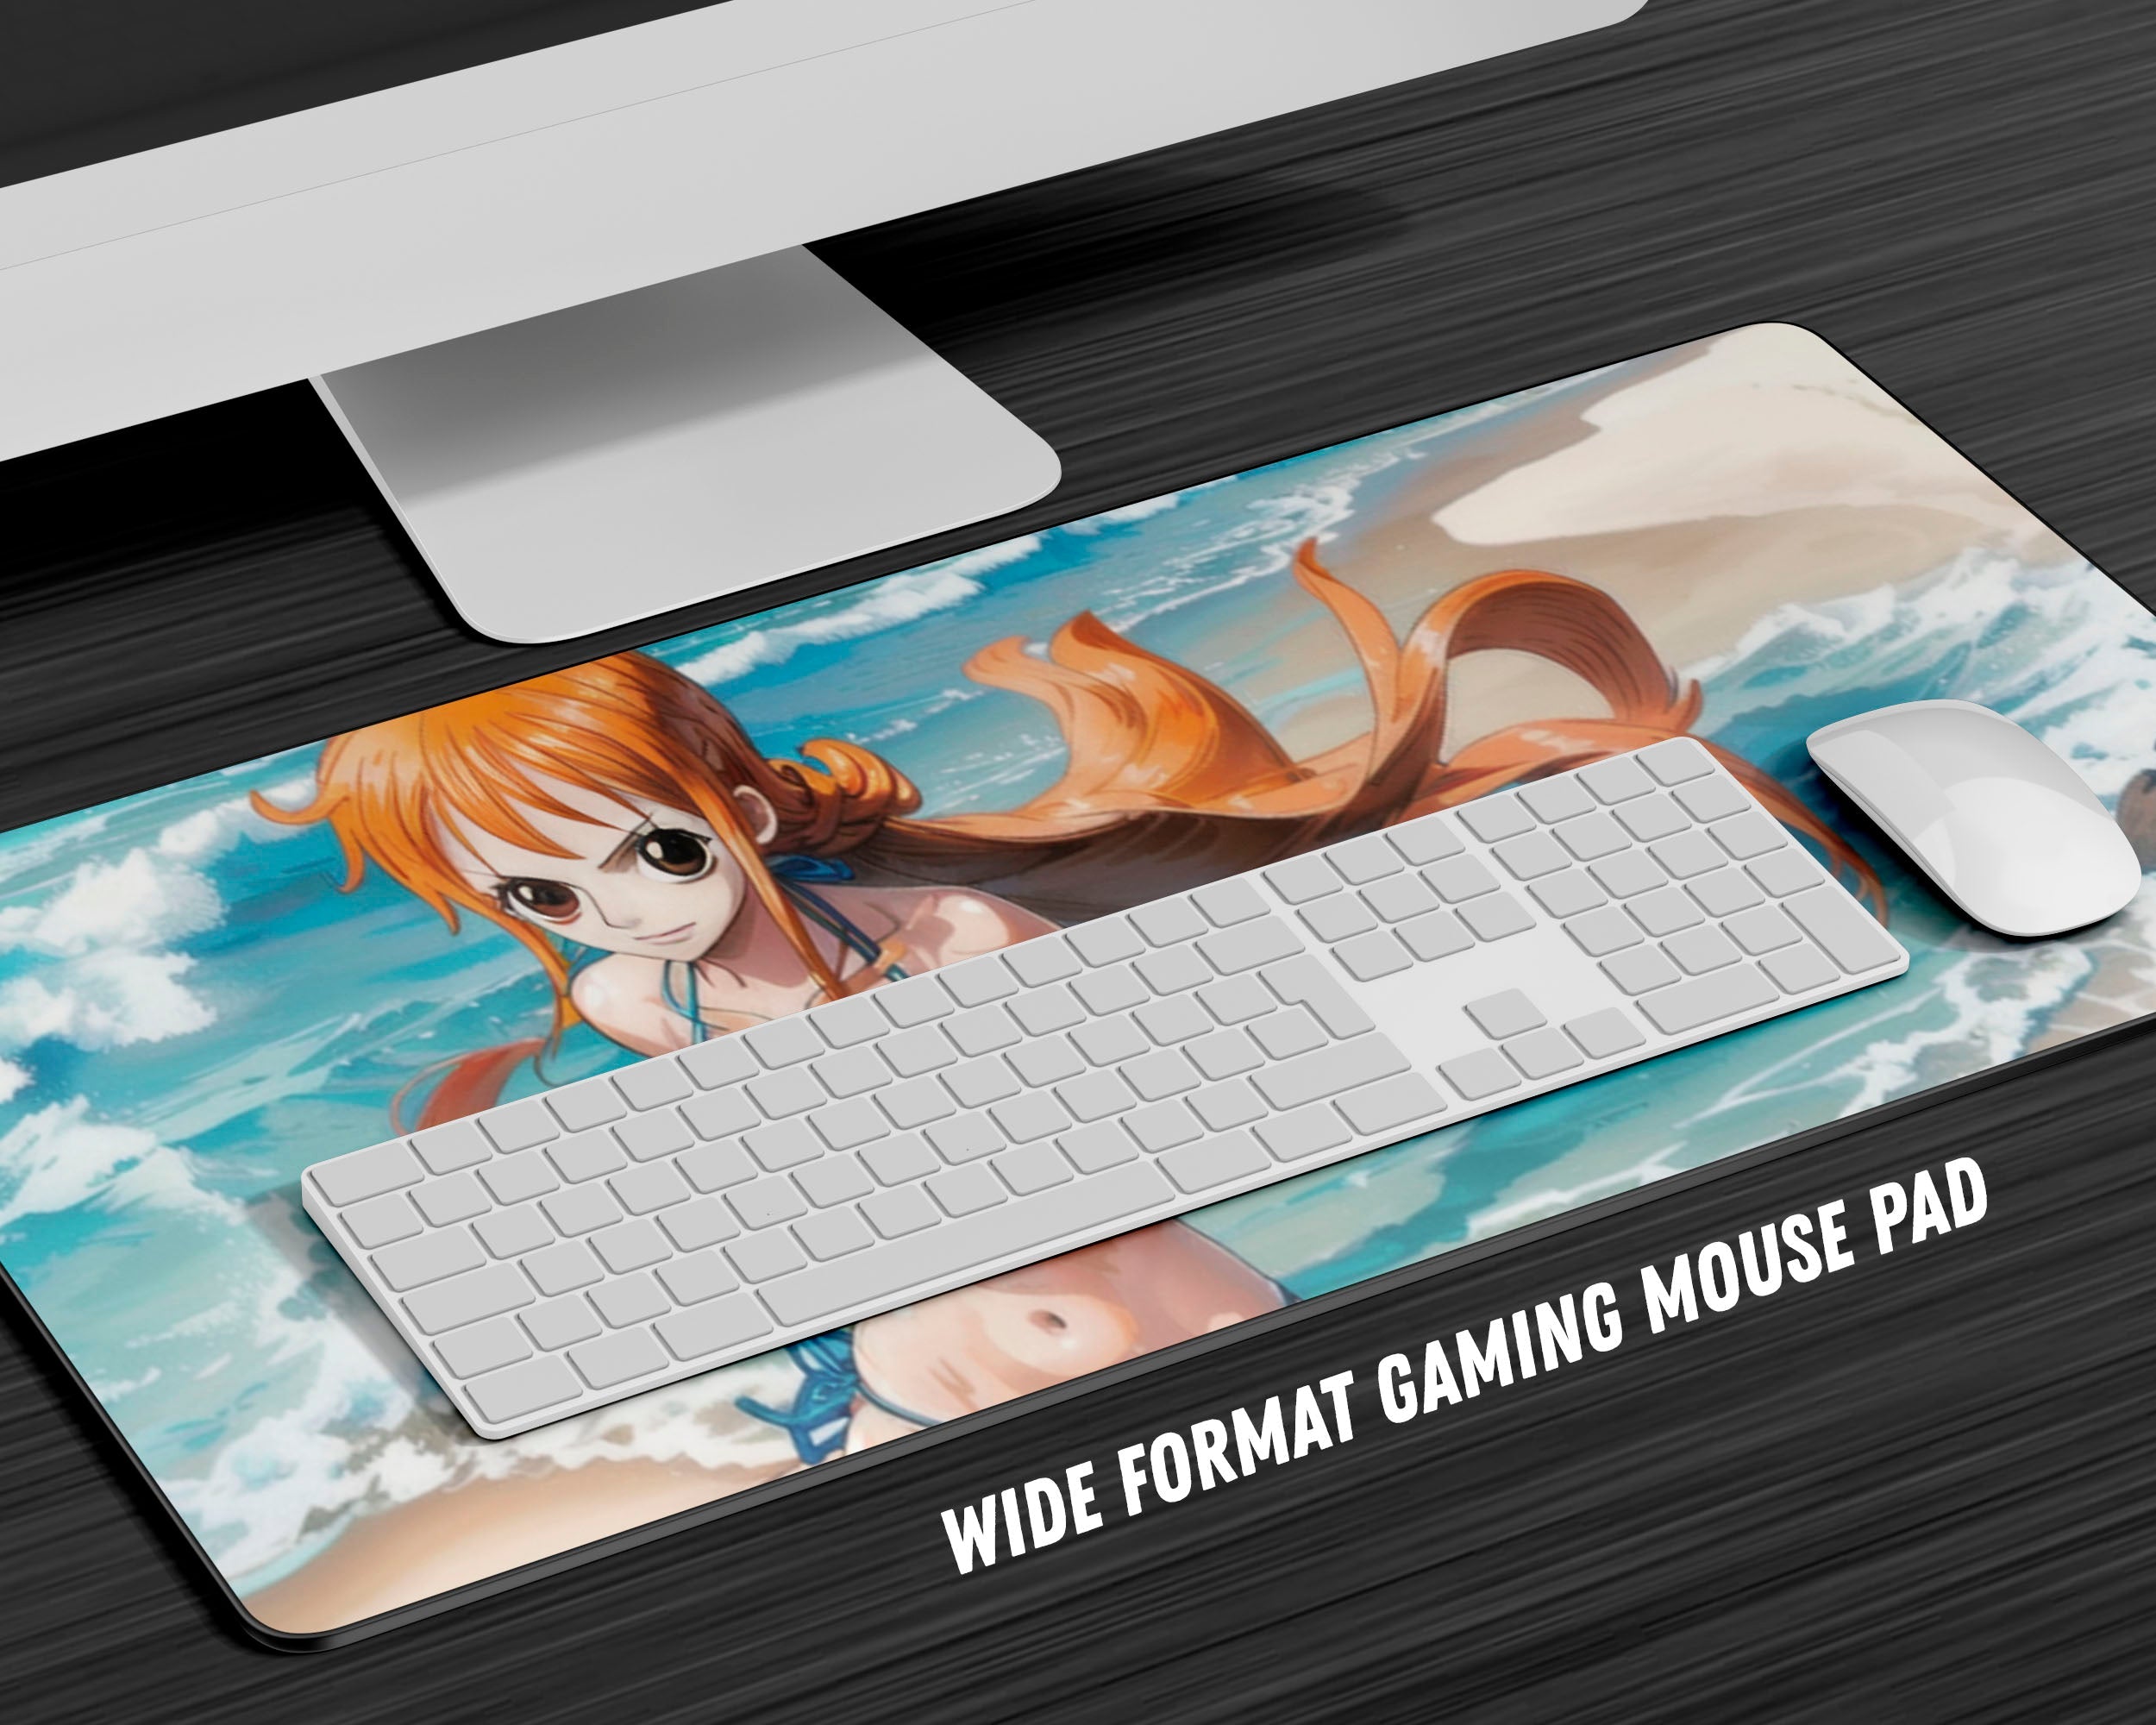 Amazon.com: Mouse Pads Gaming RGB Sexy Anime Girl Mouse Pad Laptop USB  Luminous LED Home Office Gaming Accessories Desk Mat Sexy Butt Chest 27.55  inch x12 inch- A1 : Video Games